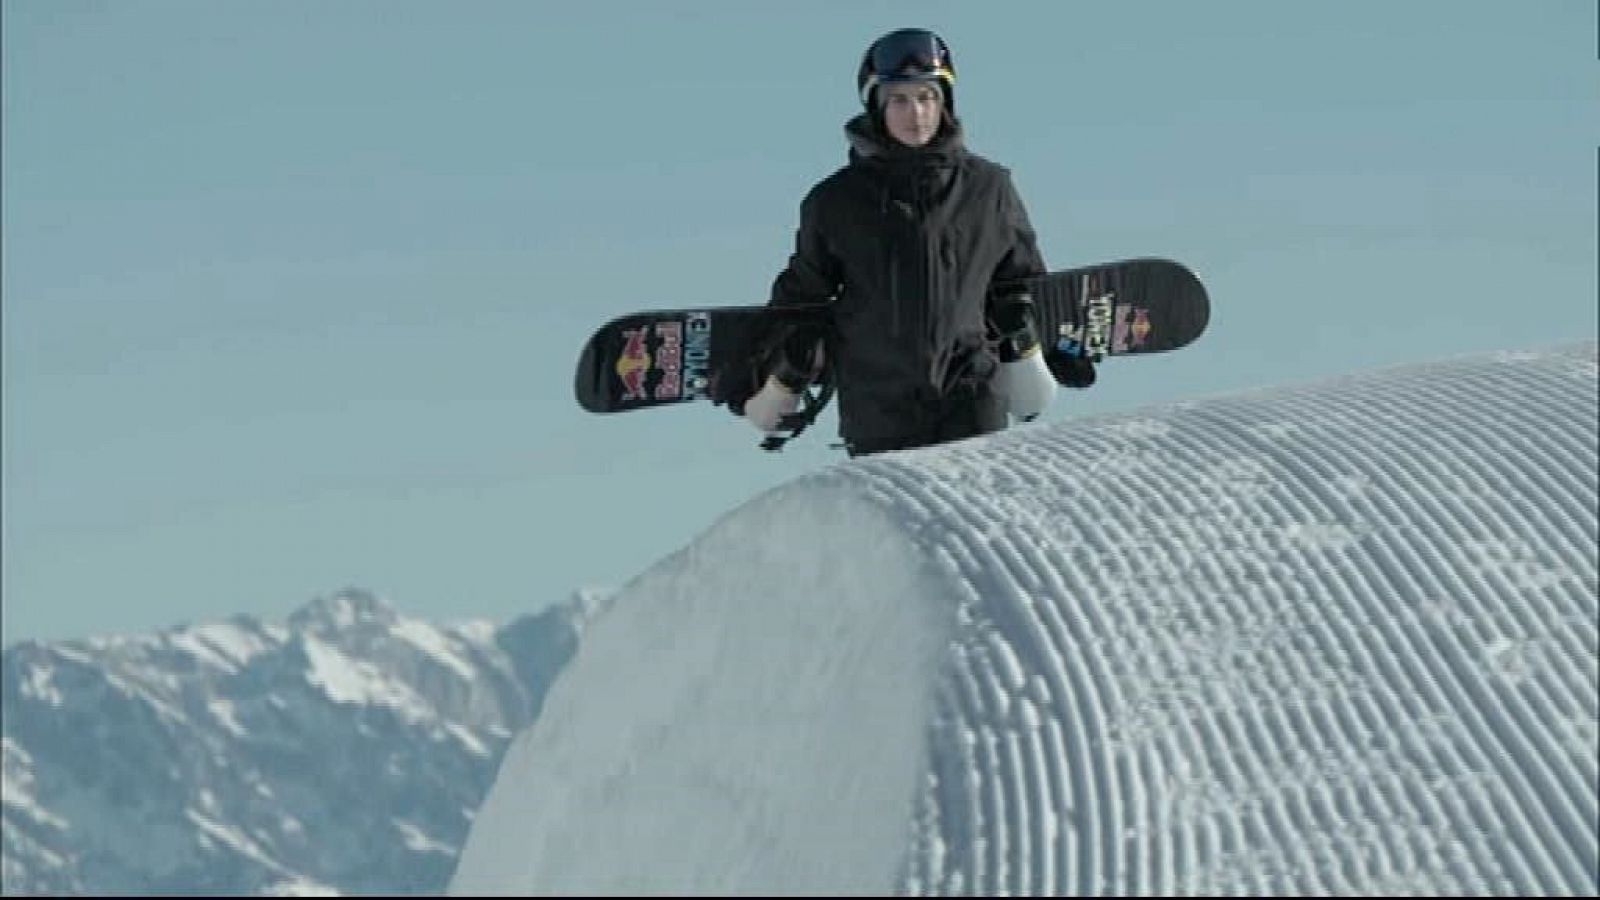 Snowboard - Documental 'Ride to the roots - Queralt Castellet'